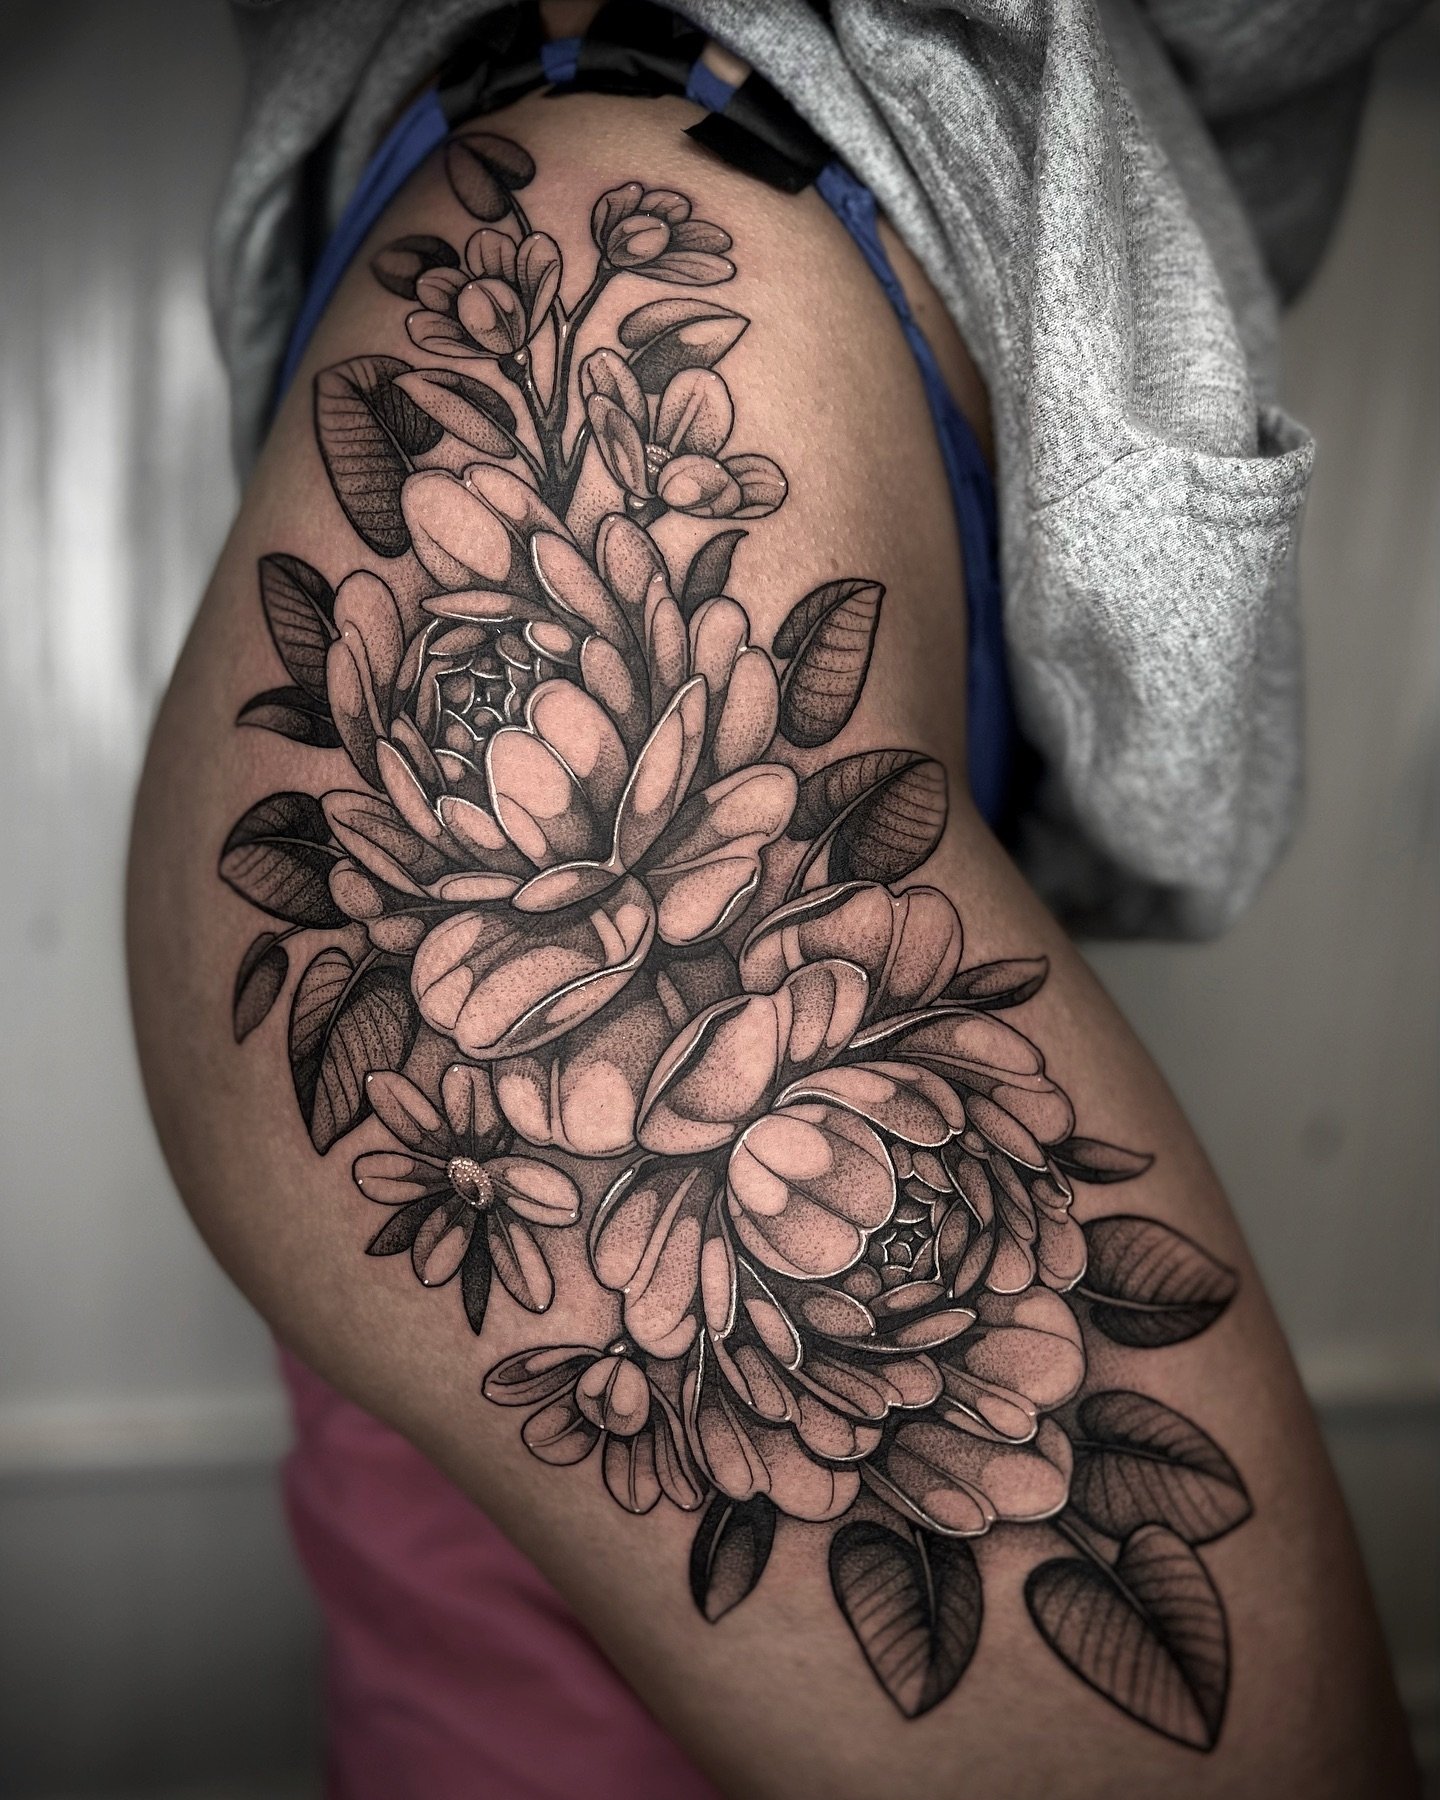 Floral hip for Anna! Thank you for the trust and sitting so well! 😊🖤
.
.
.
.
#peonytattoo #peoniestattoo #peonies #floraltattoo #botanicaltattoo #flowertattoo #hiptattoo #thightattoo #goldenordertattoo #nhink #nhtattooers #nhtattoo #nhartists #nhar